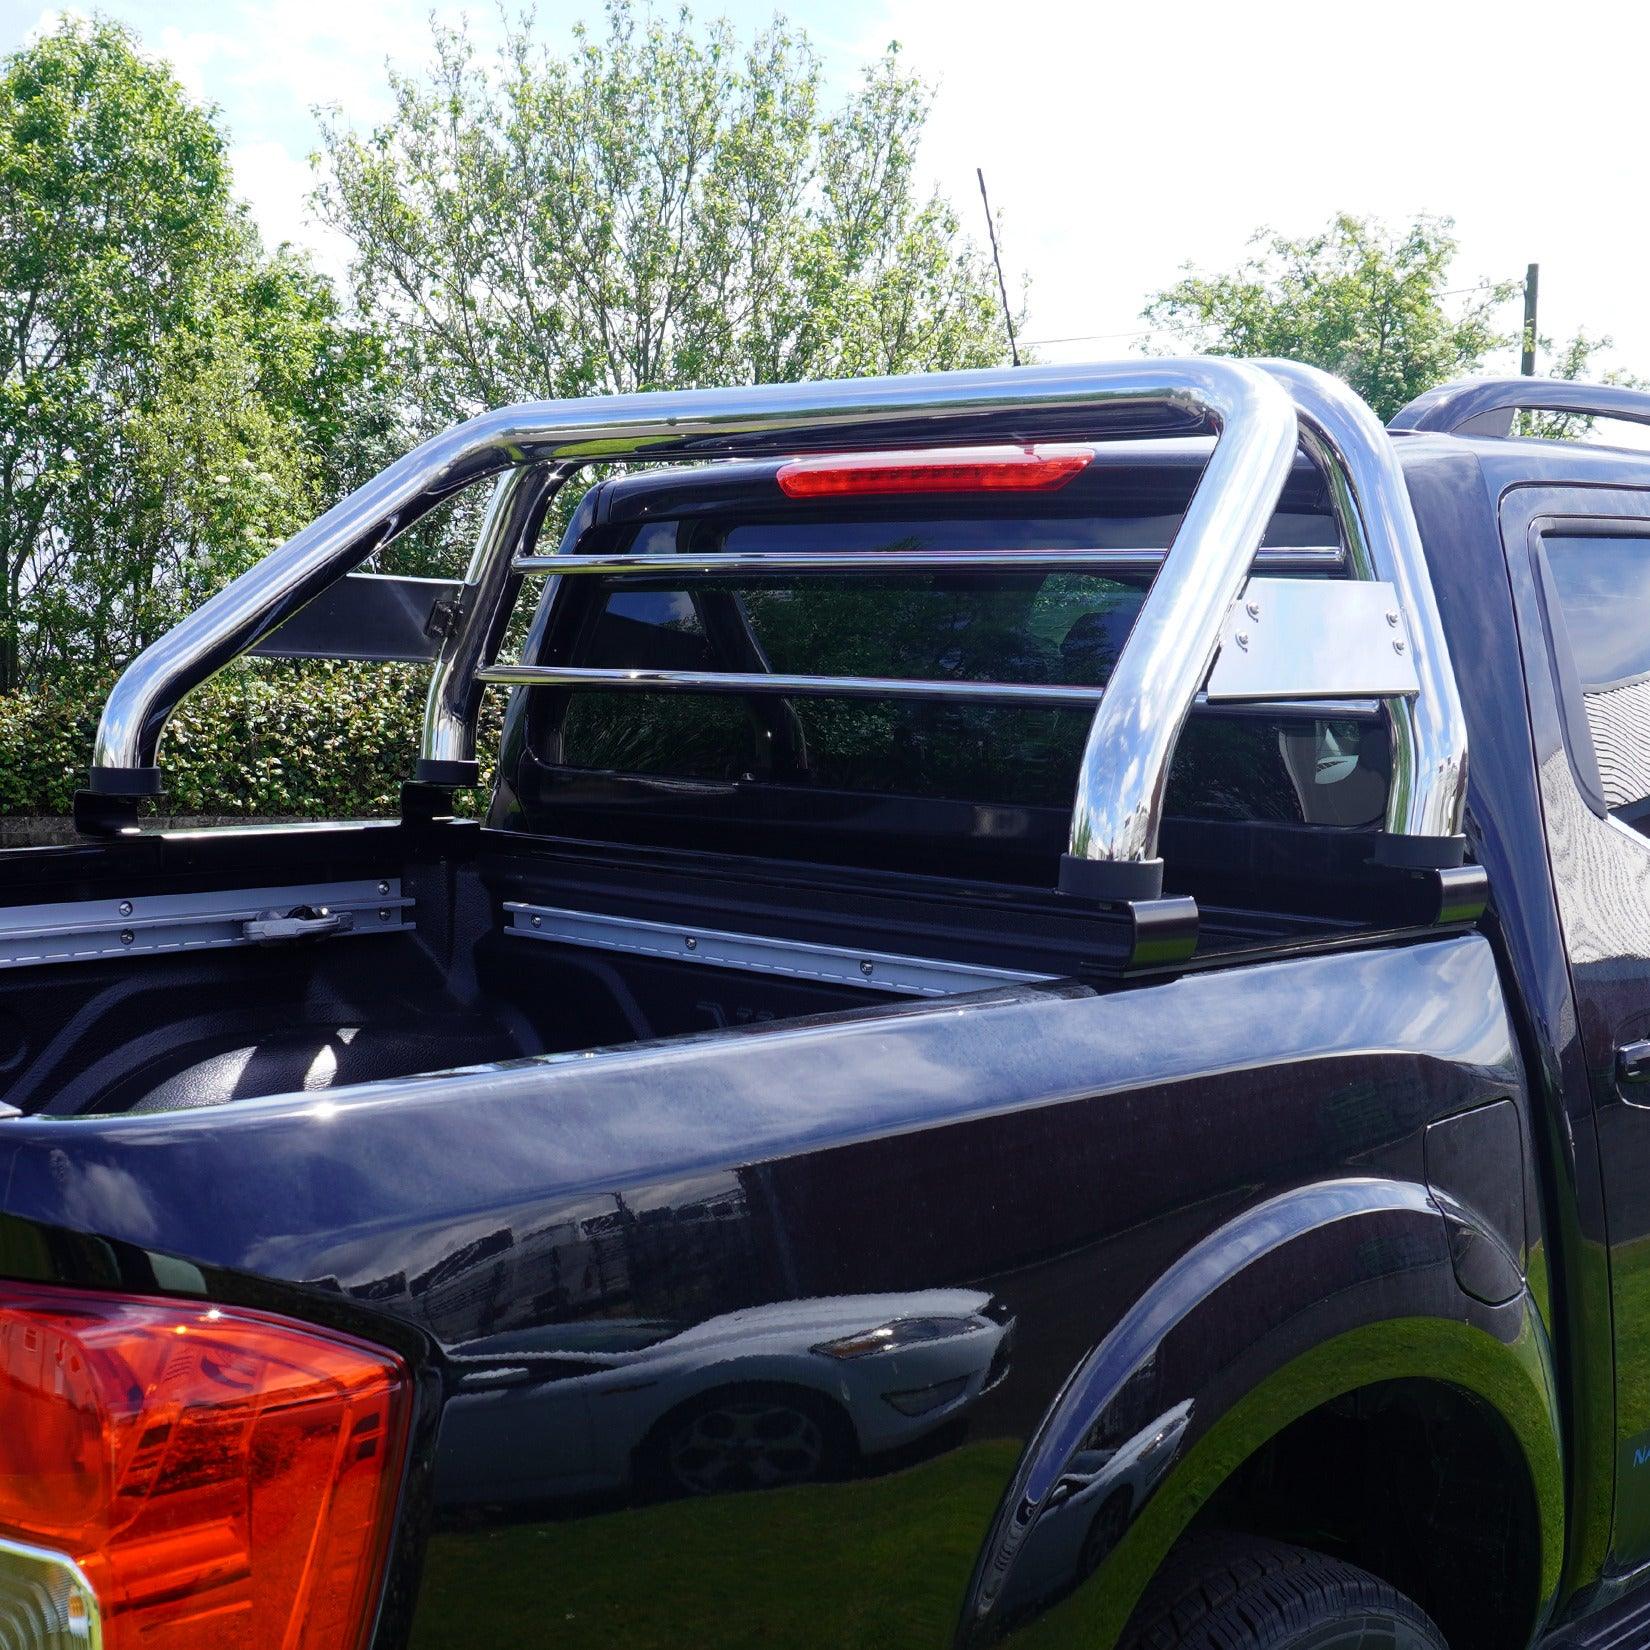 TOYOTA HILUX MK8 2016 ON STAINLESS STEEL SX ROLL BAR - Storm Xccessories2